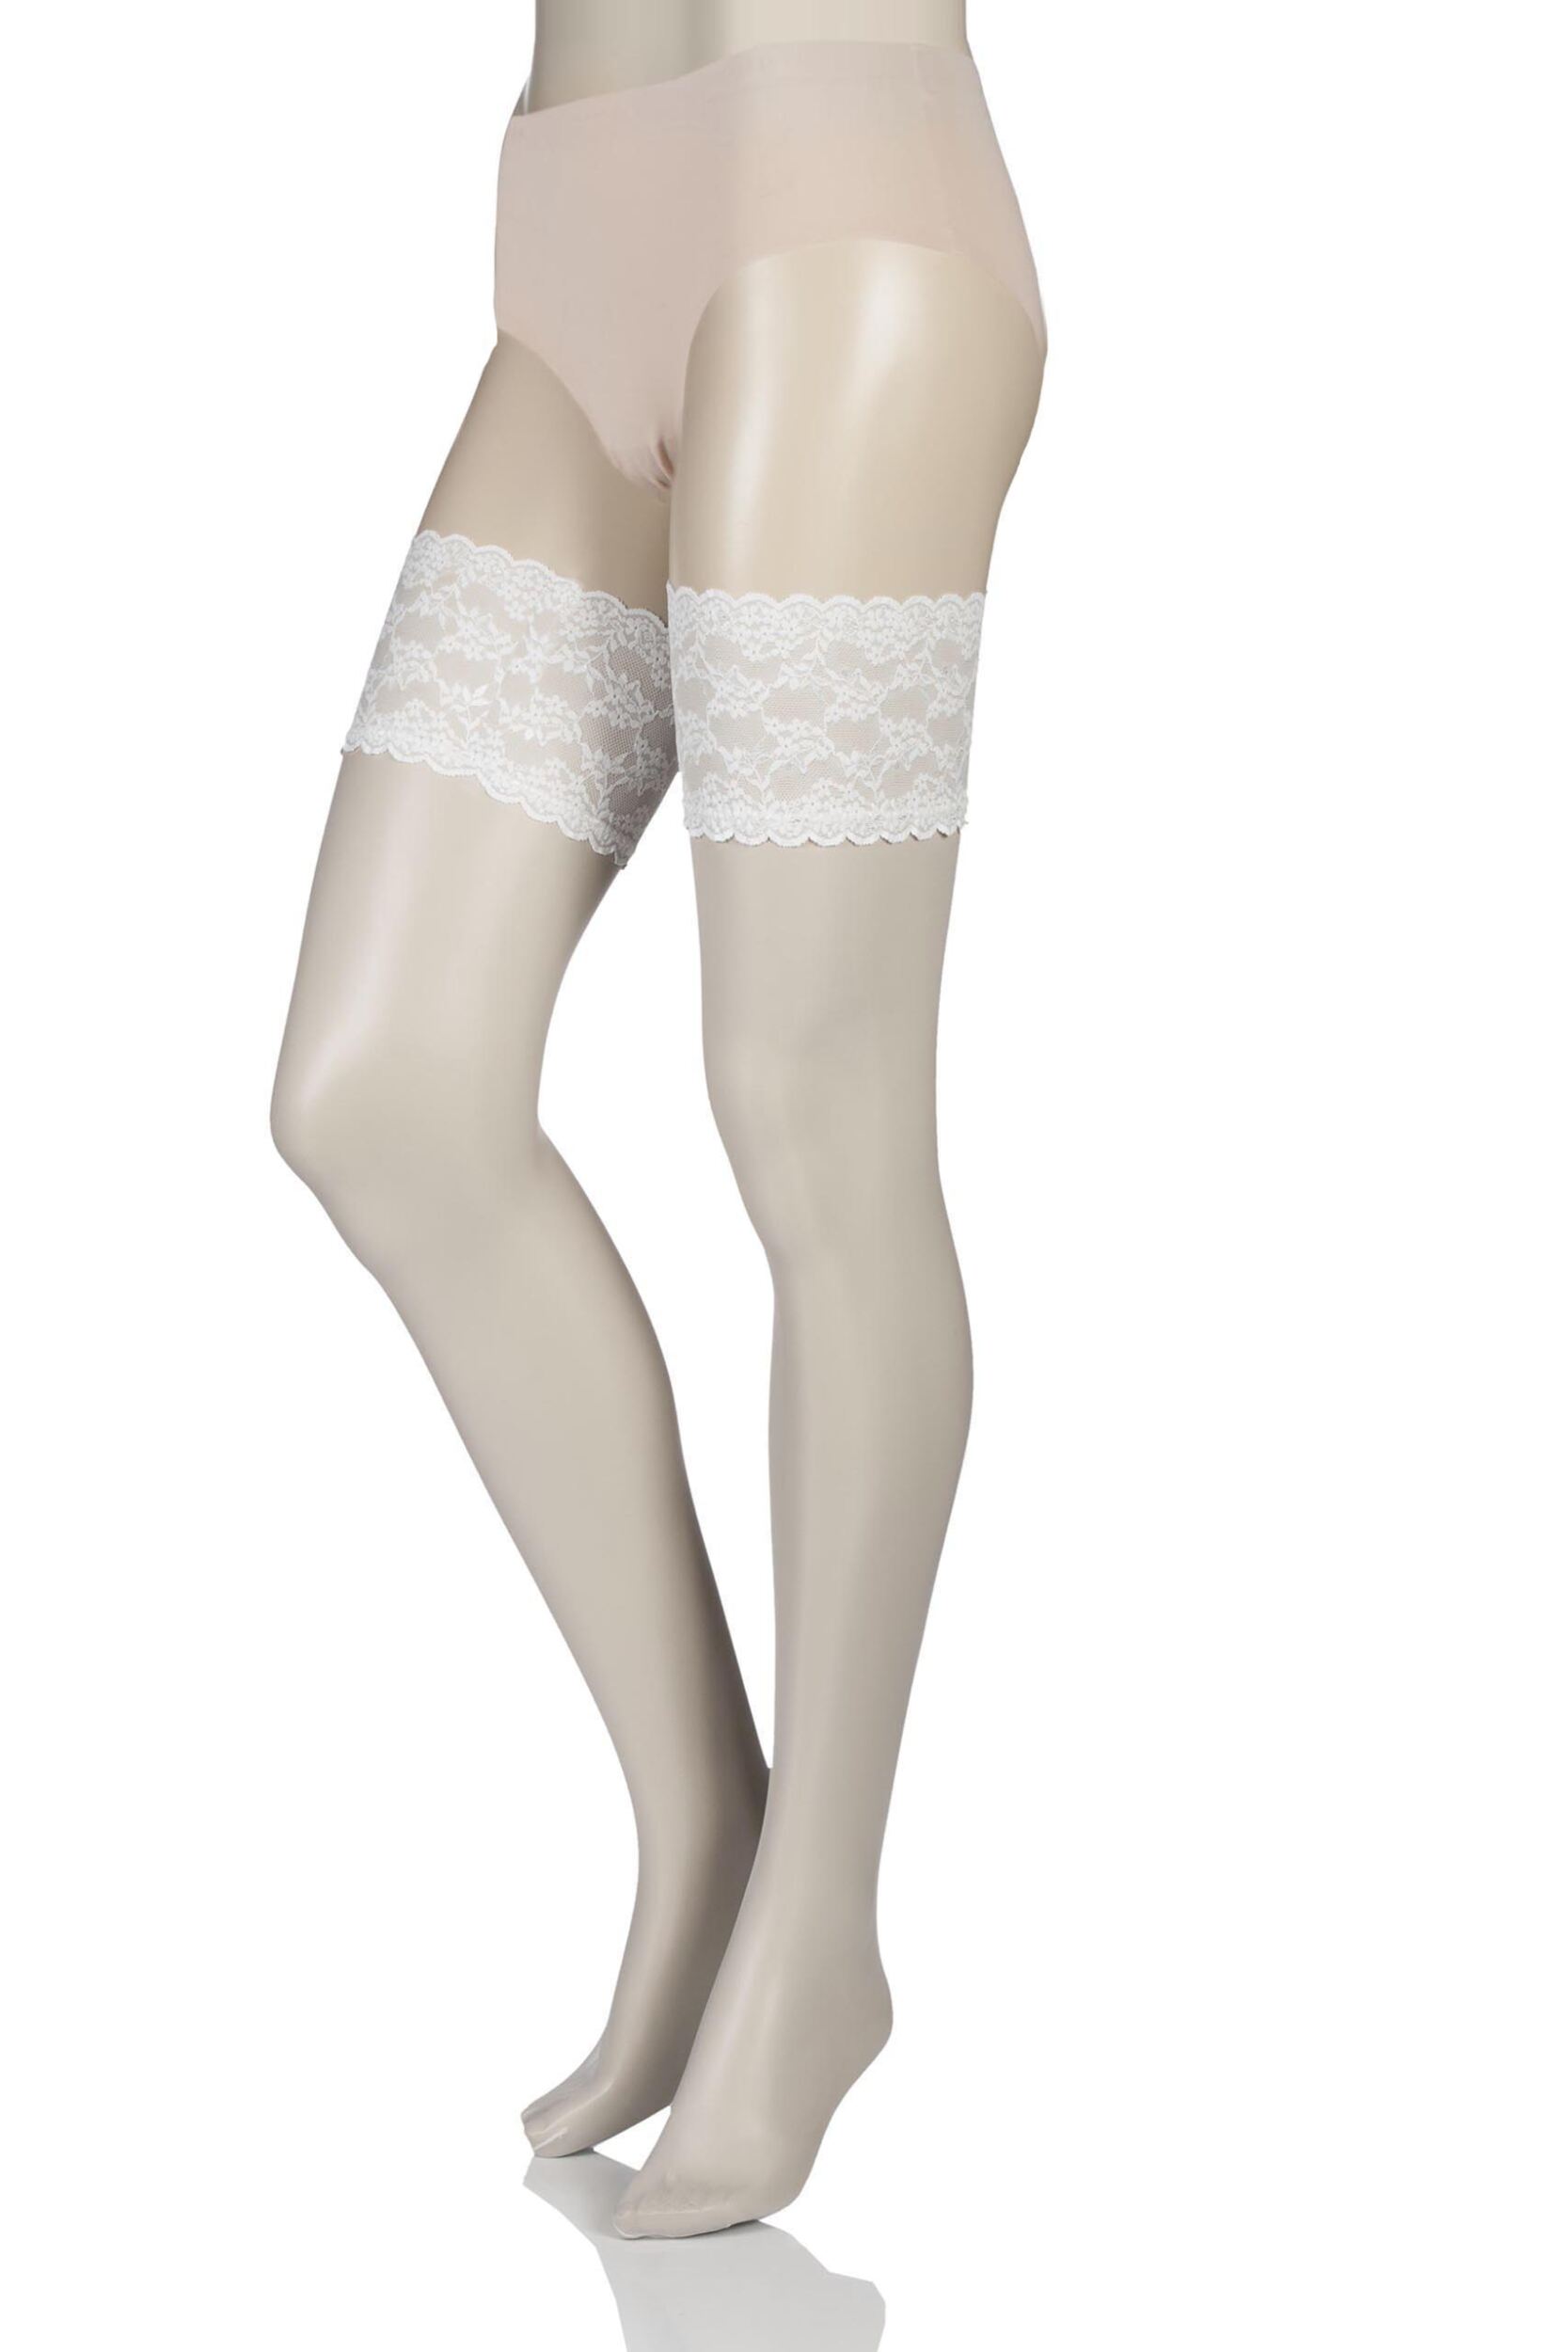 1 Pair Ivory 10 Denier Bridal Lace Top Hold Ups Ladies Small - Charnos